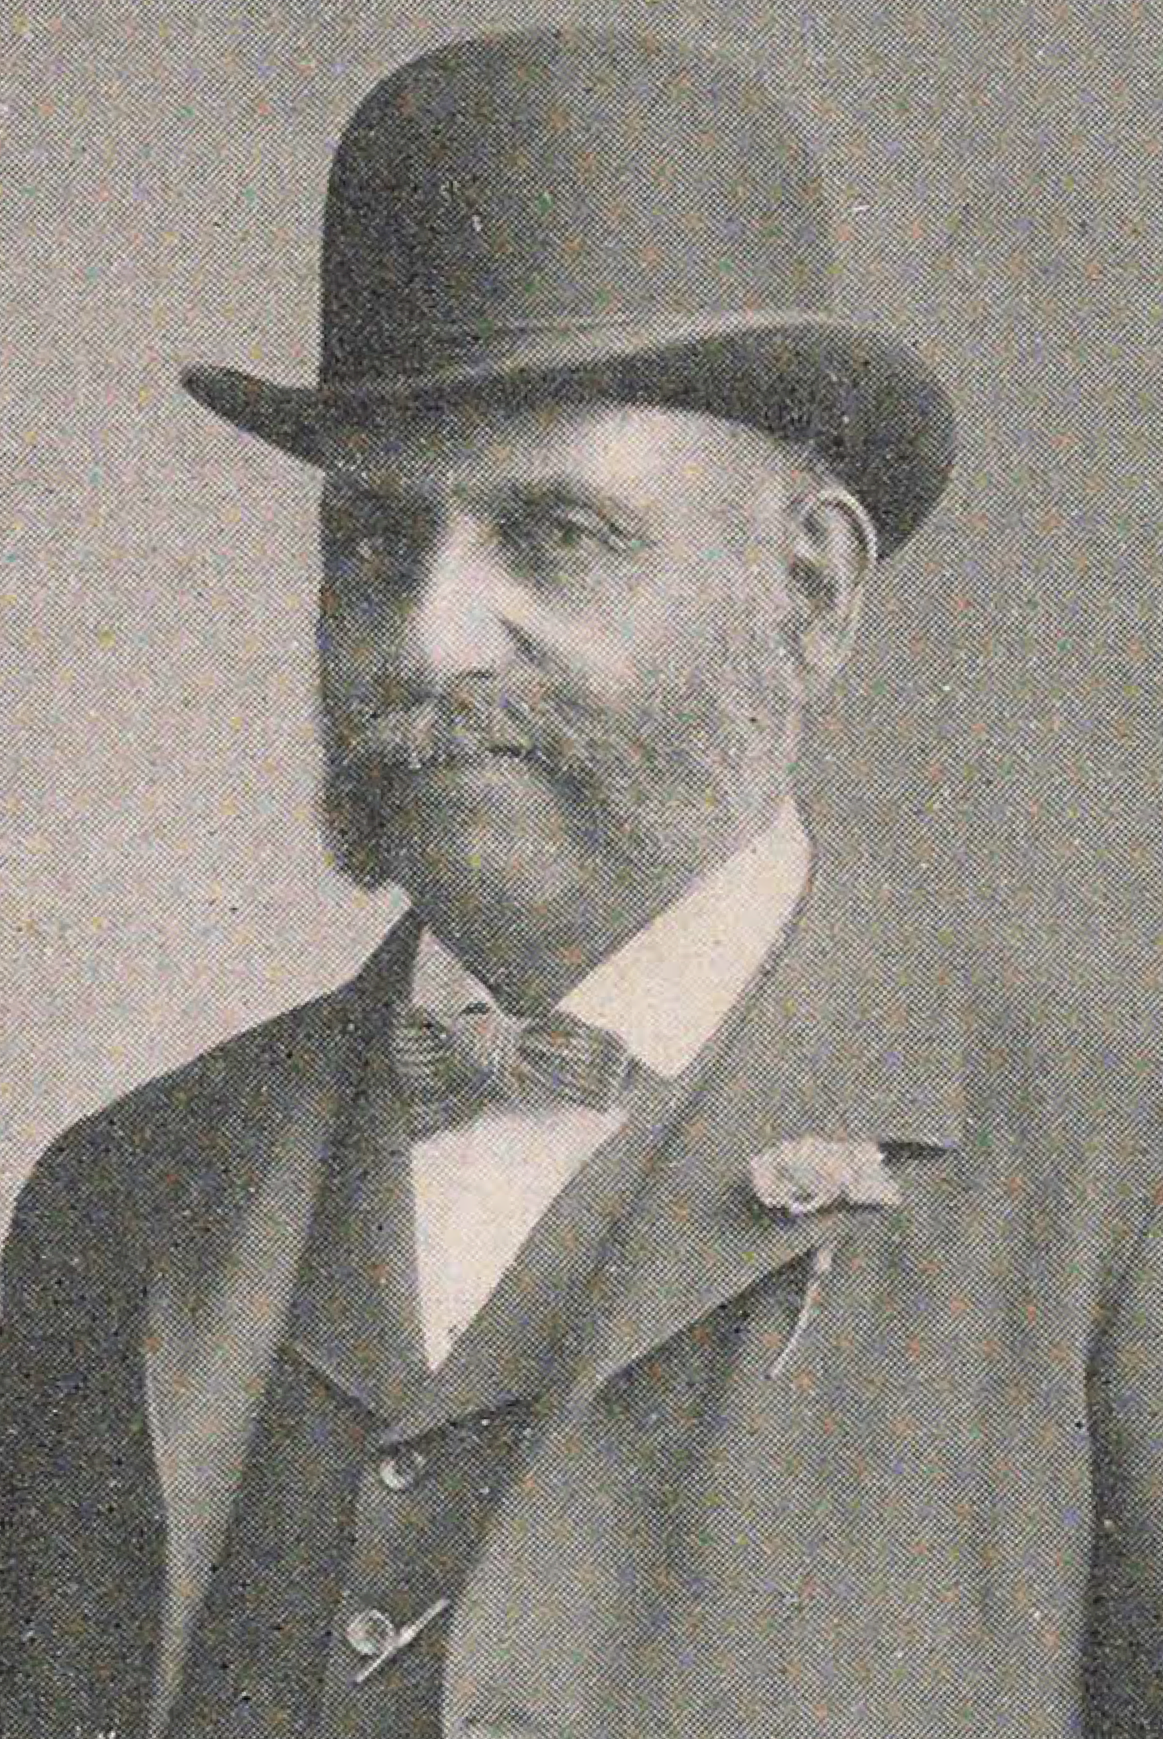 Old black and white photograph of a distinguished looking older man with a bowler hat and bushy whiskers.